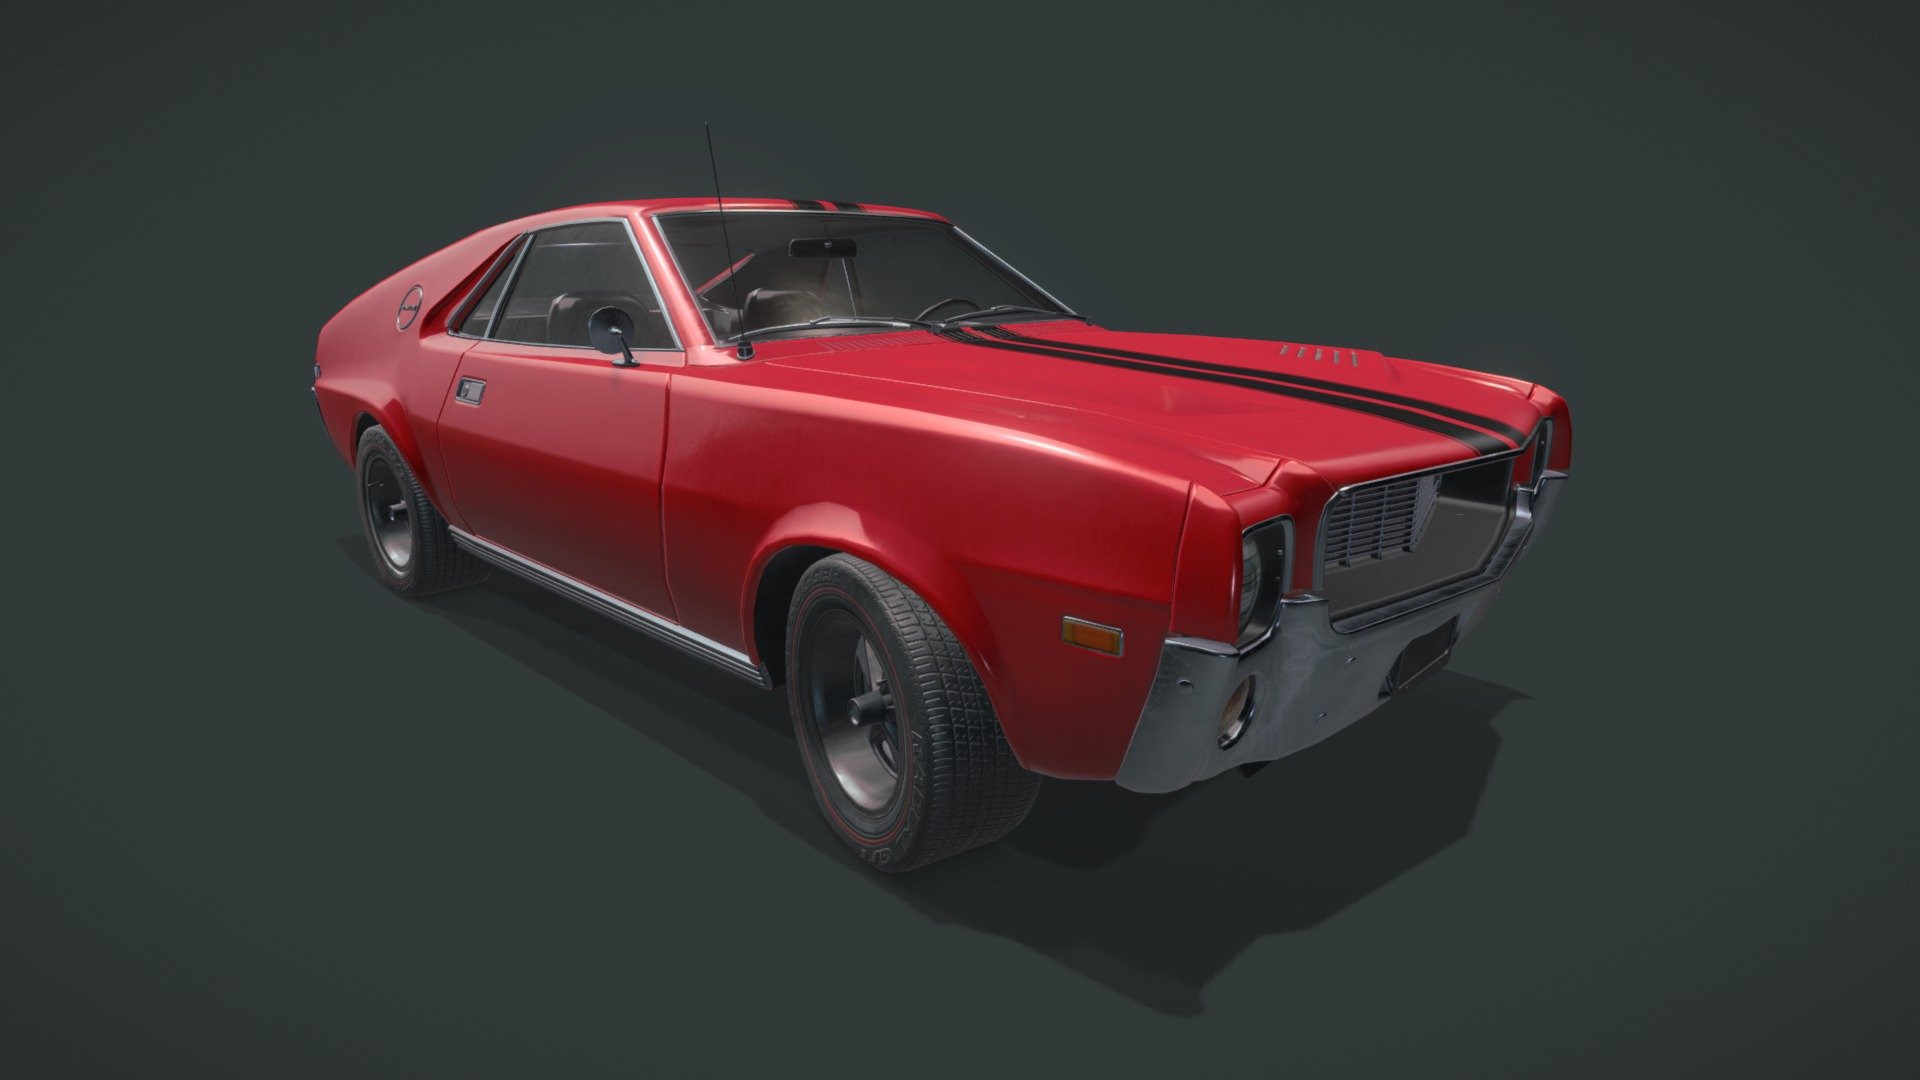 AMC AMX model from 1968/69 reference 3d model